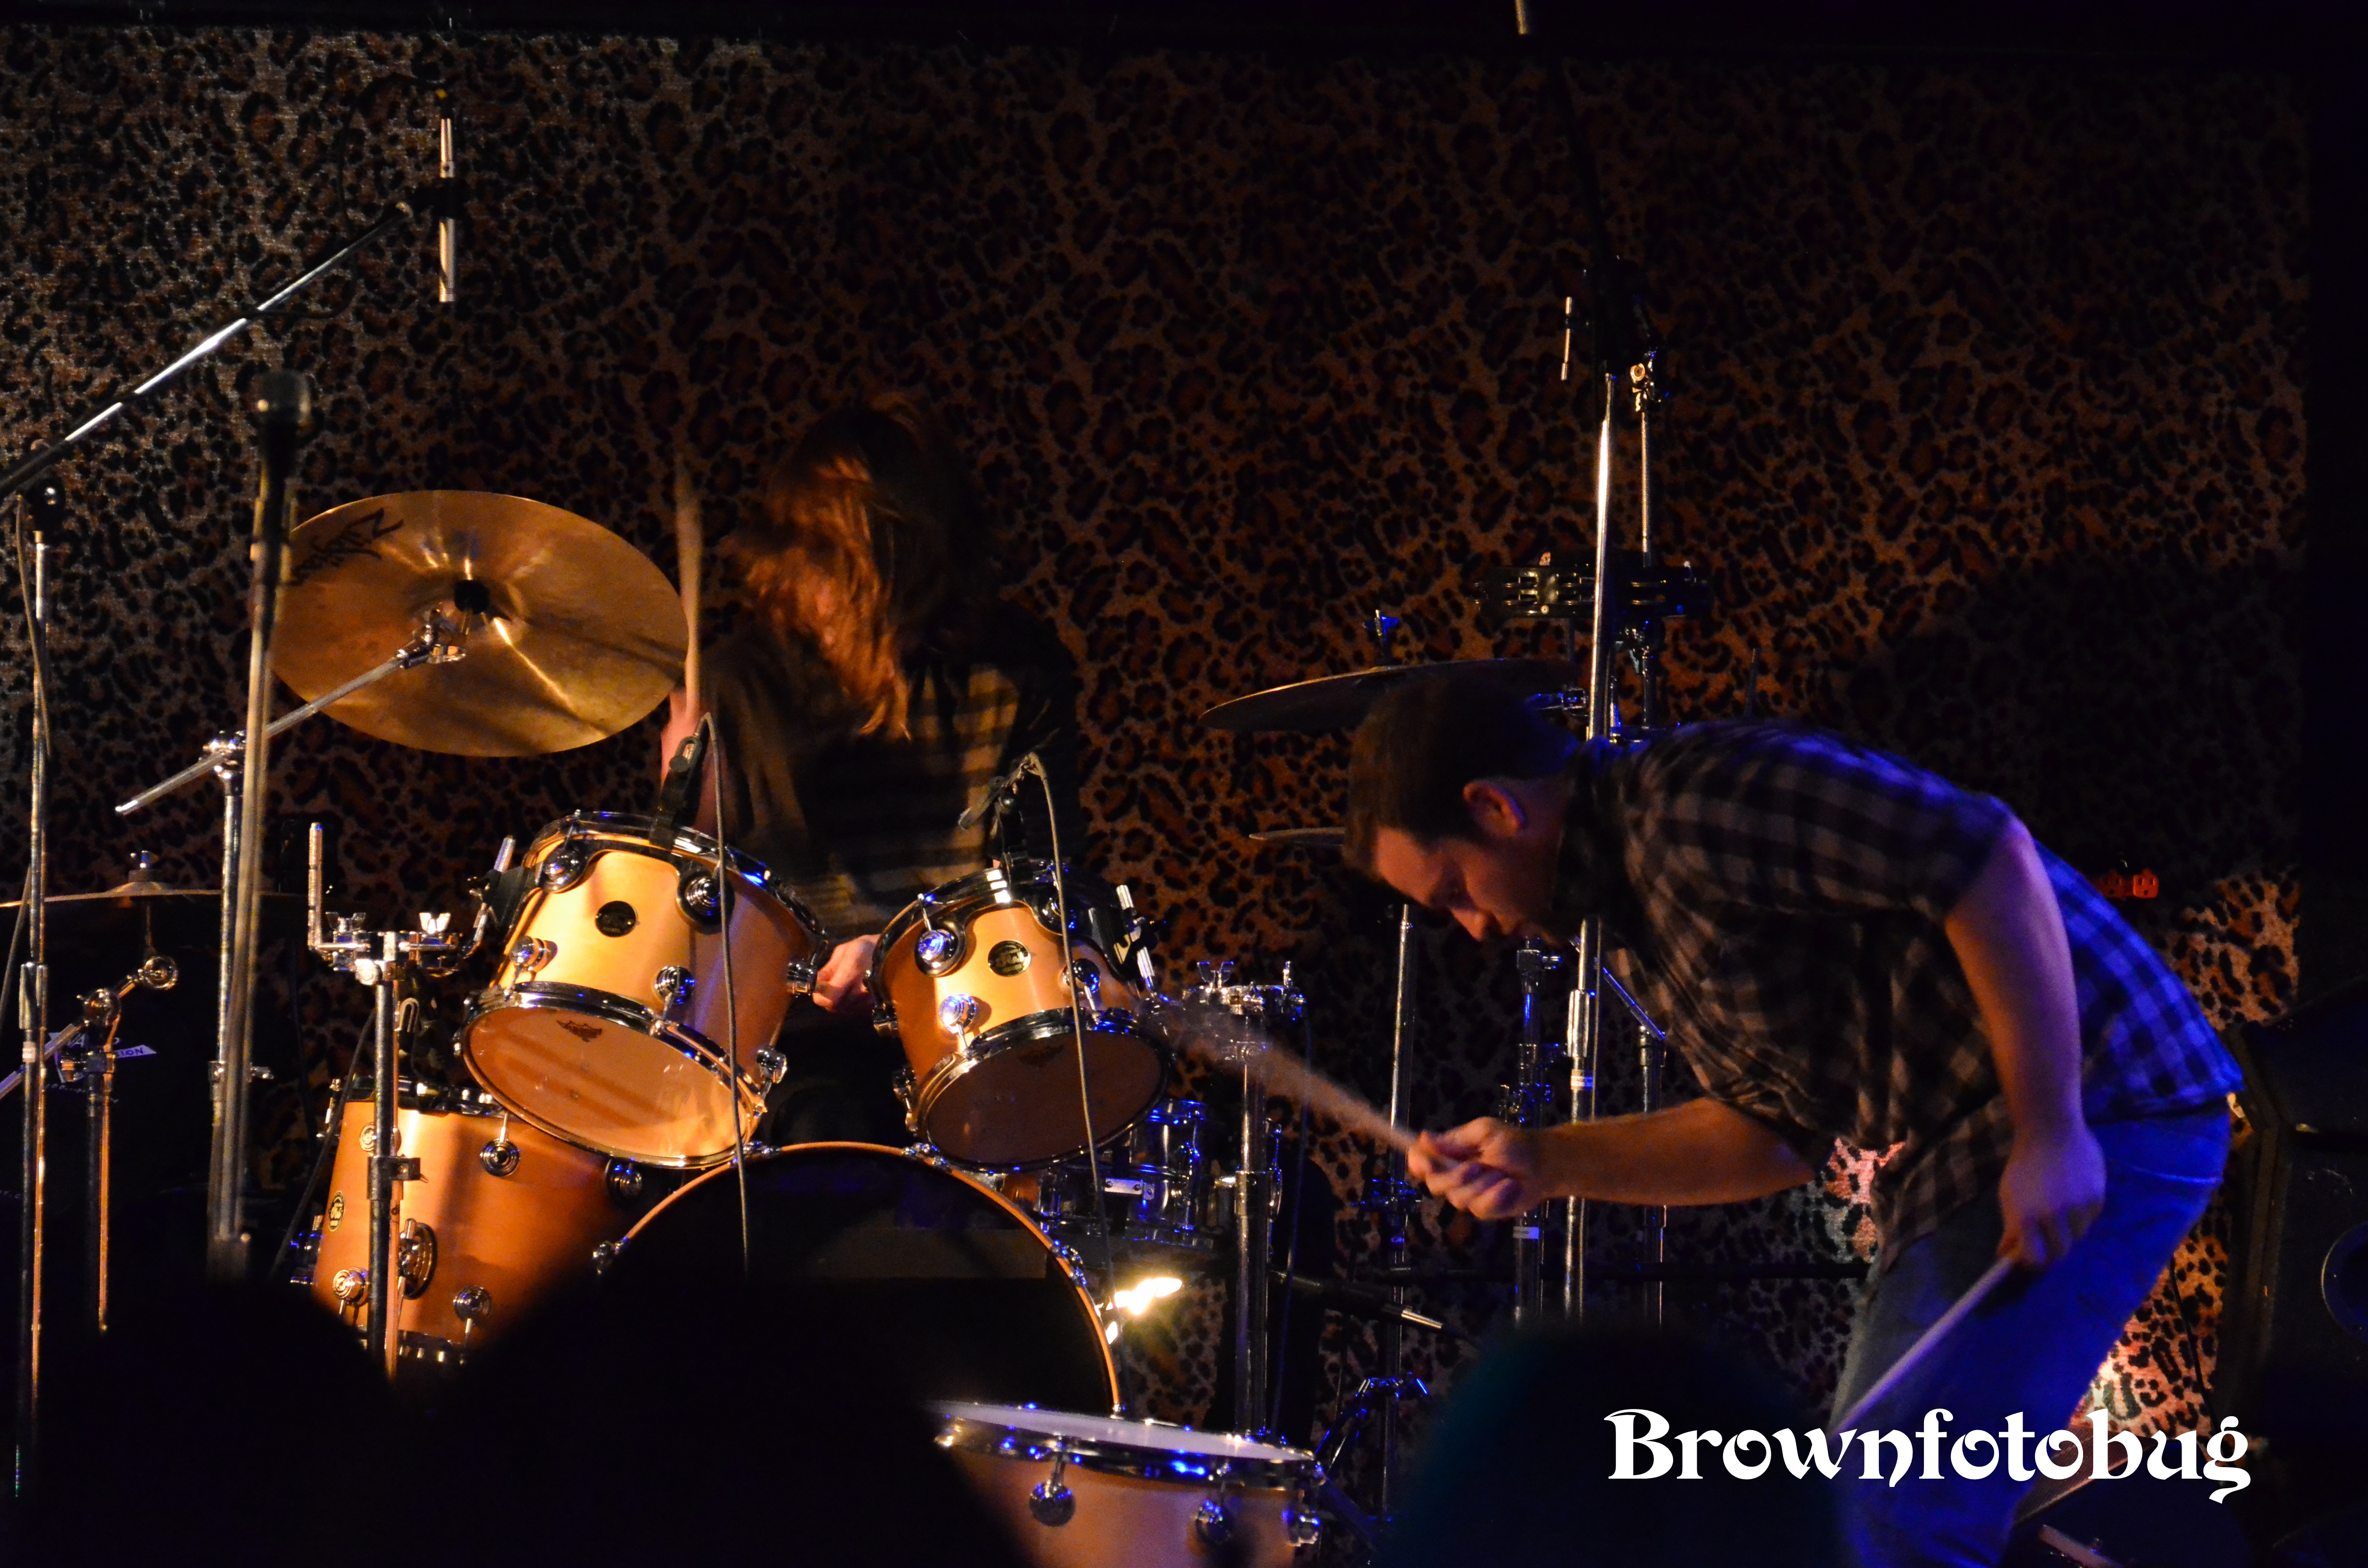 Born of Ghosts live at The Rec Room (Photo by Arlene Brown)